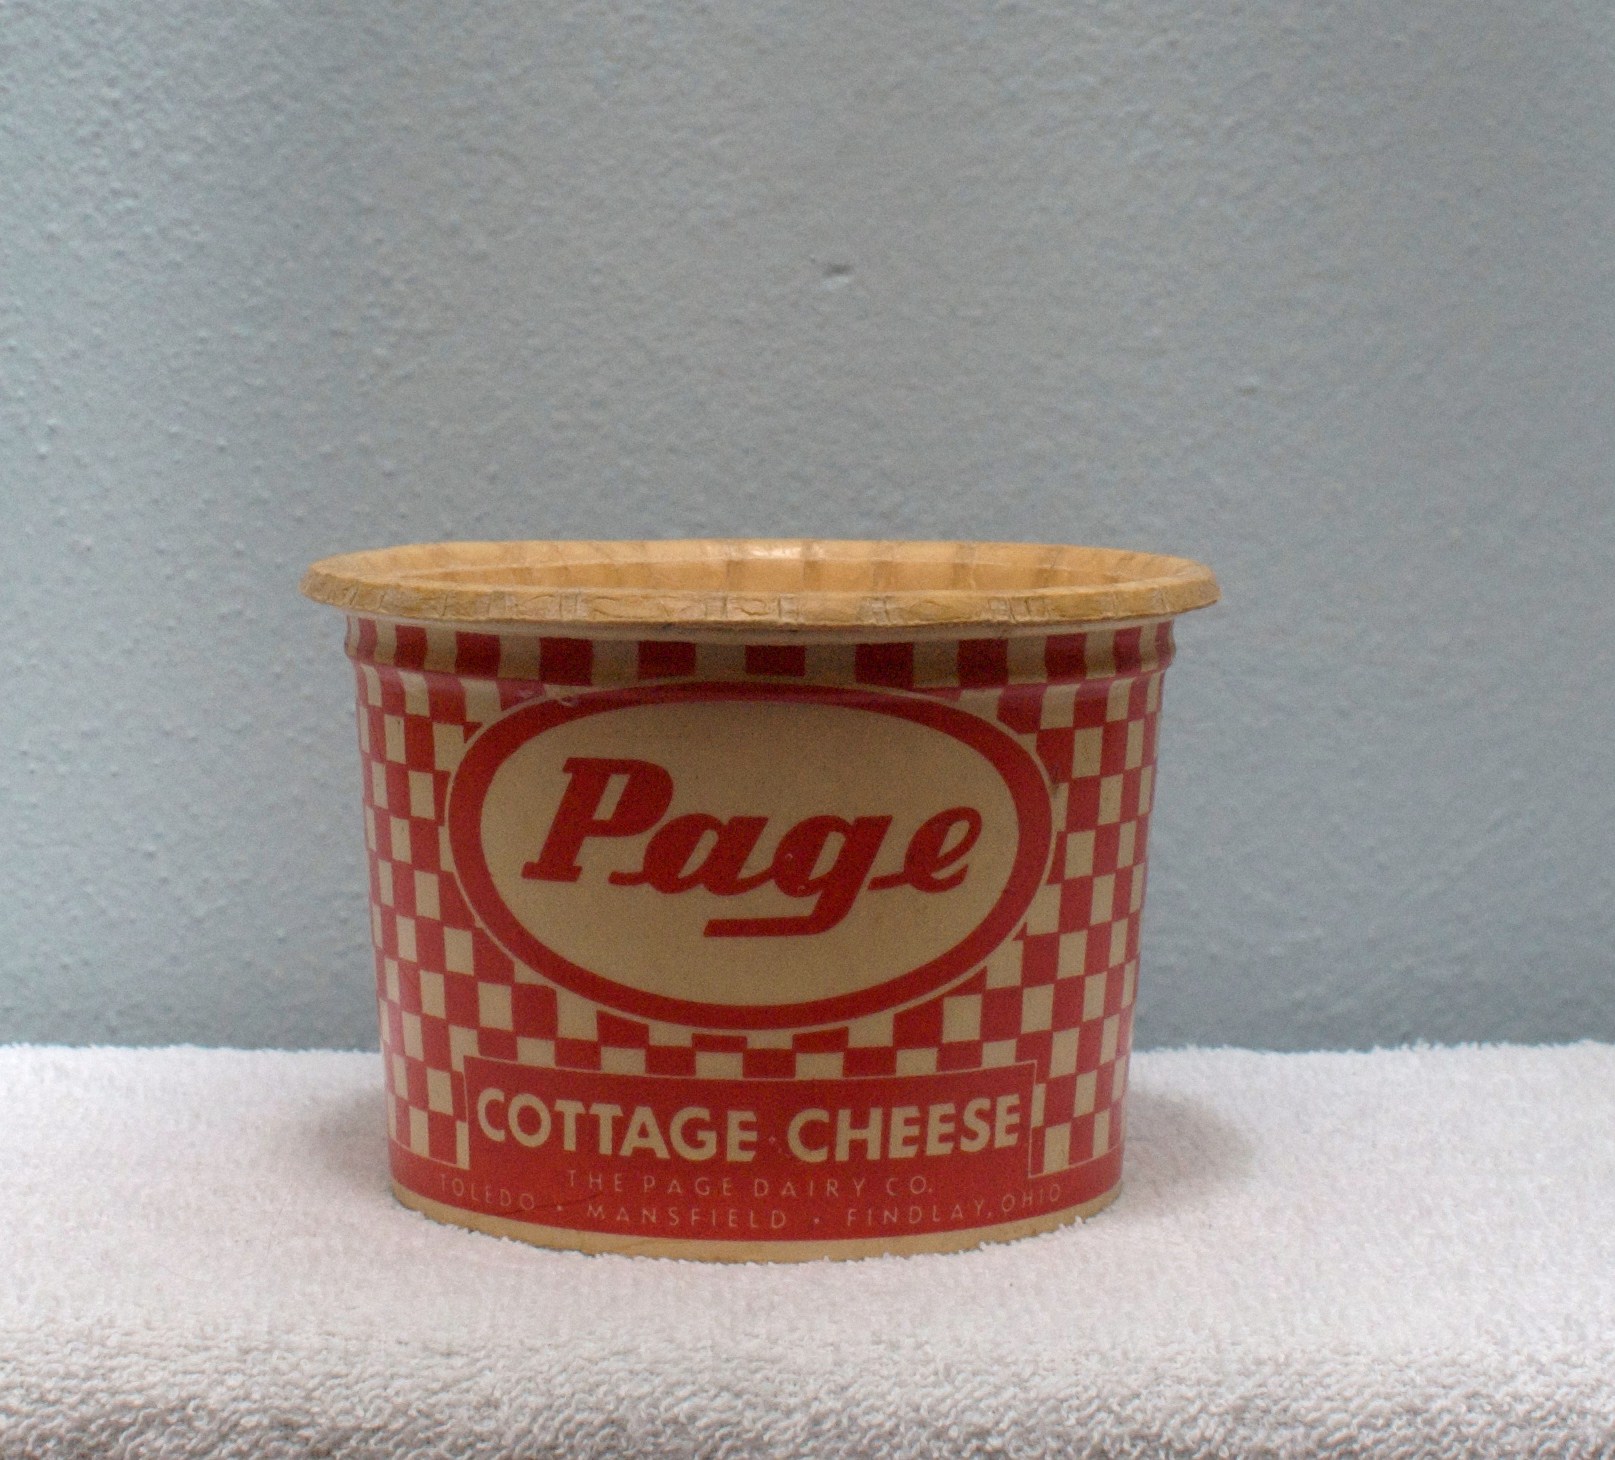 Pages Cottage Cheese Cardboard Container